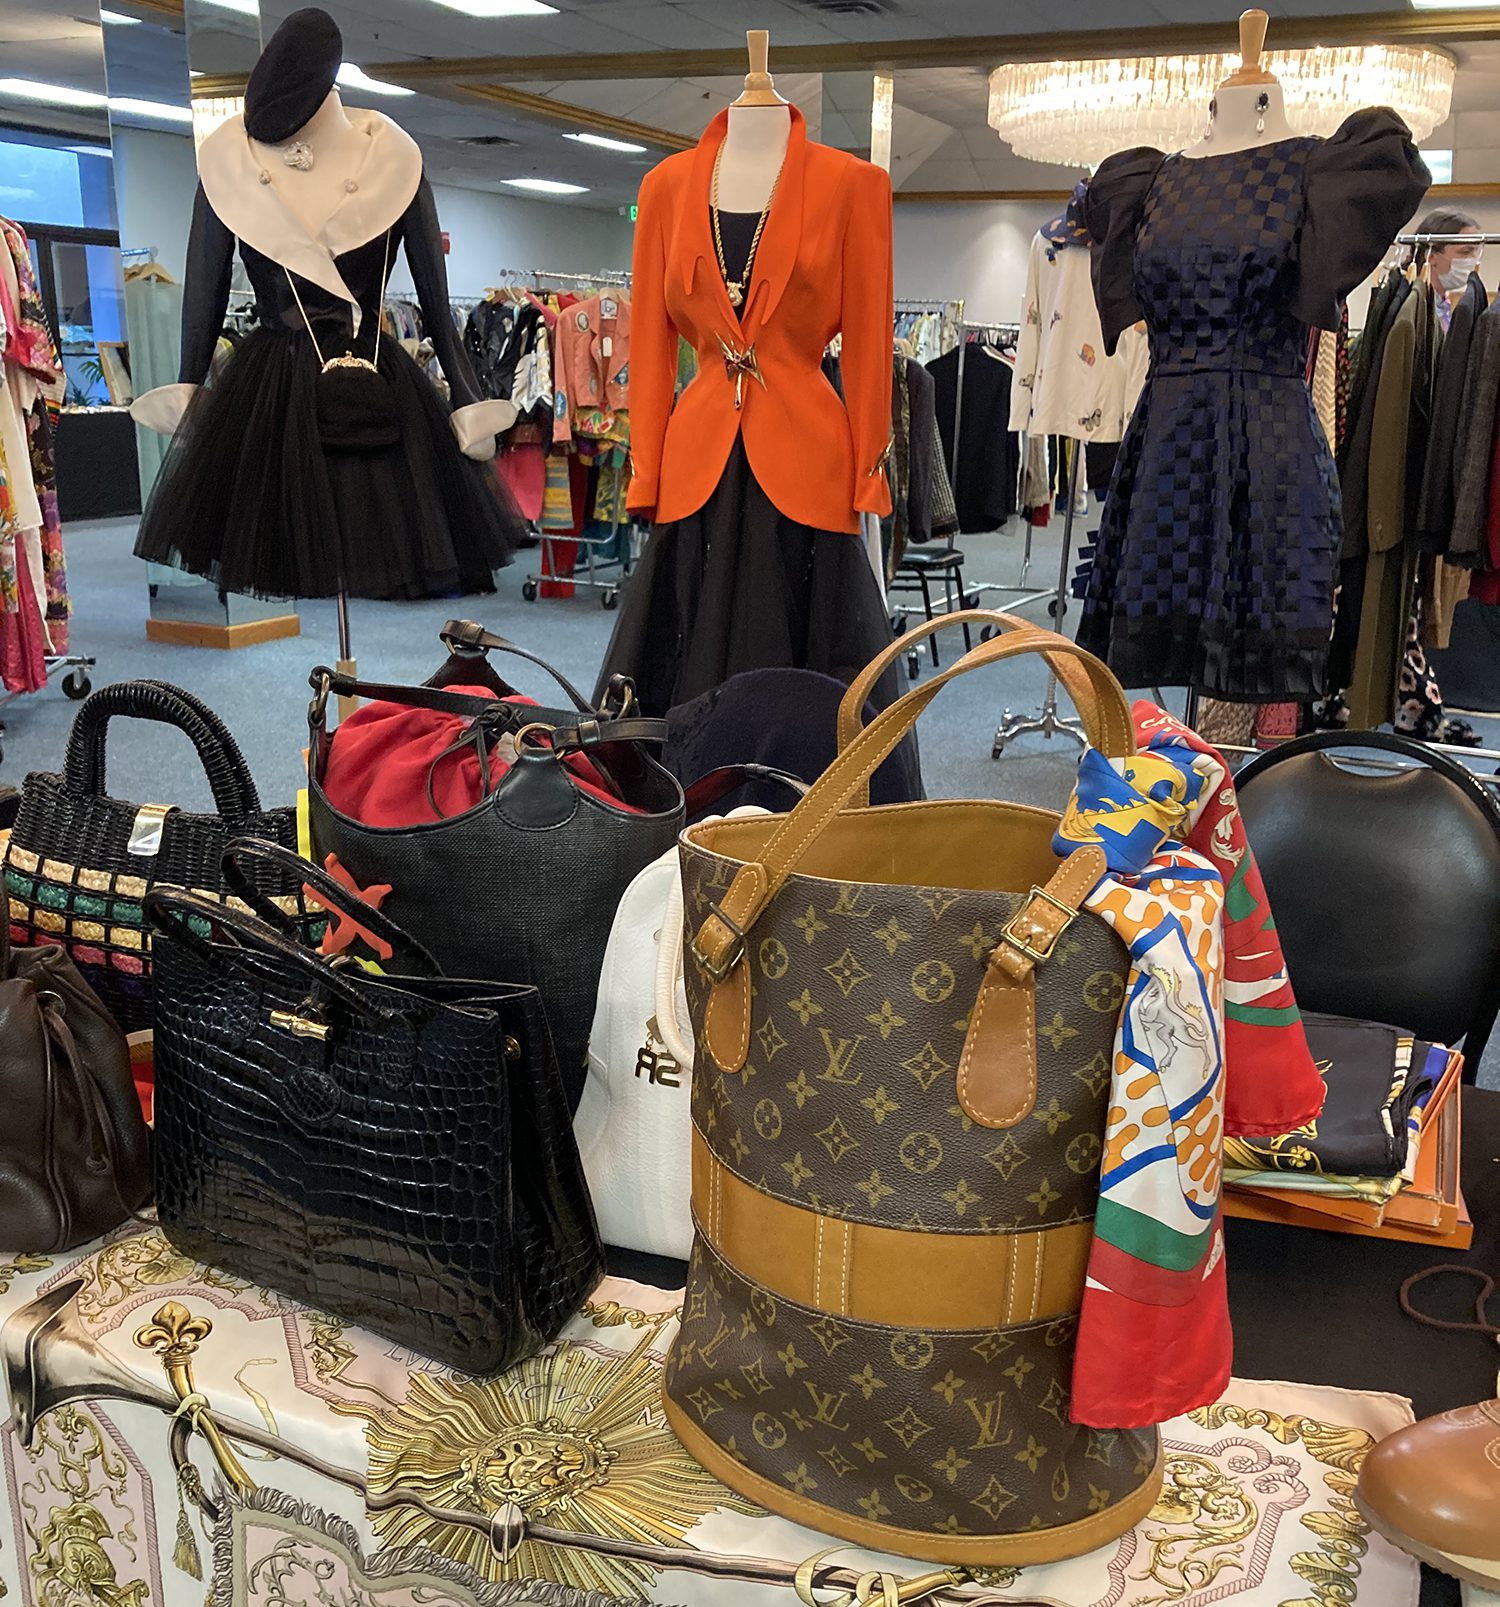 Fashionable finds at the pop-up Curated Vintage Event